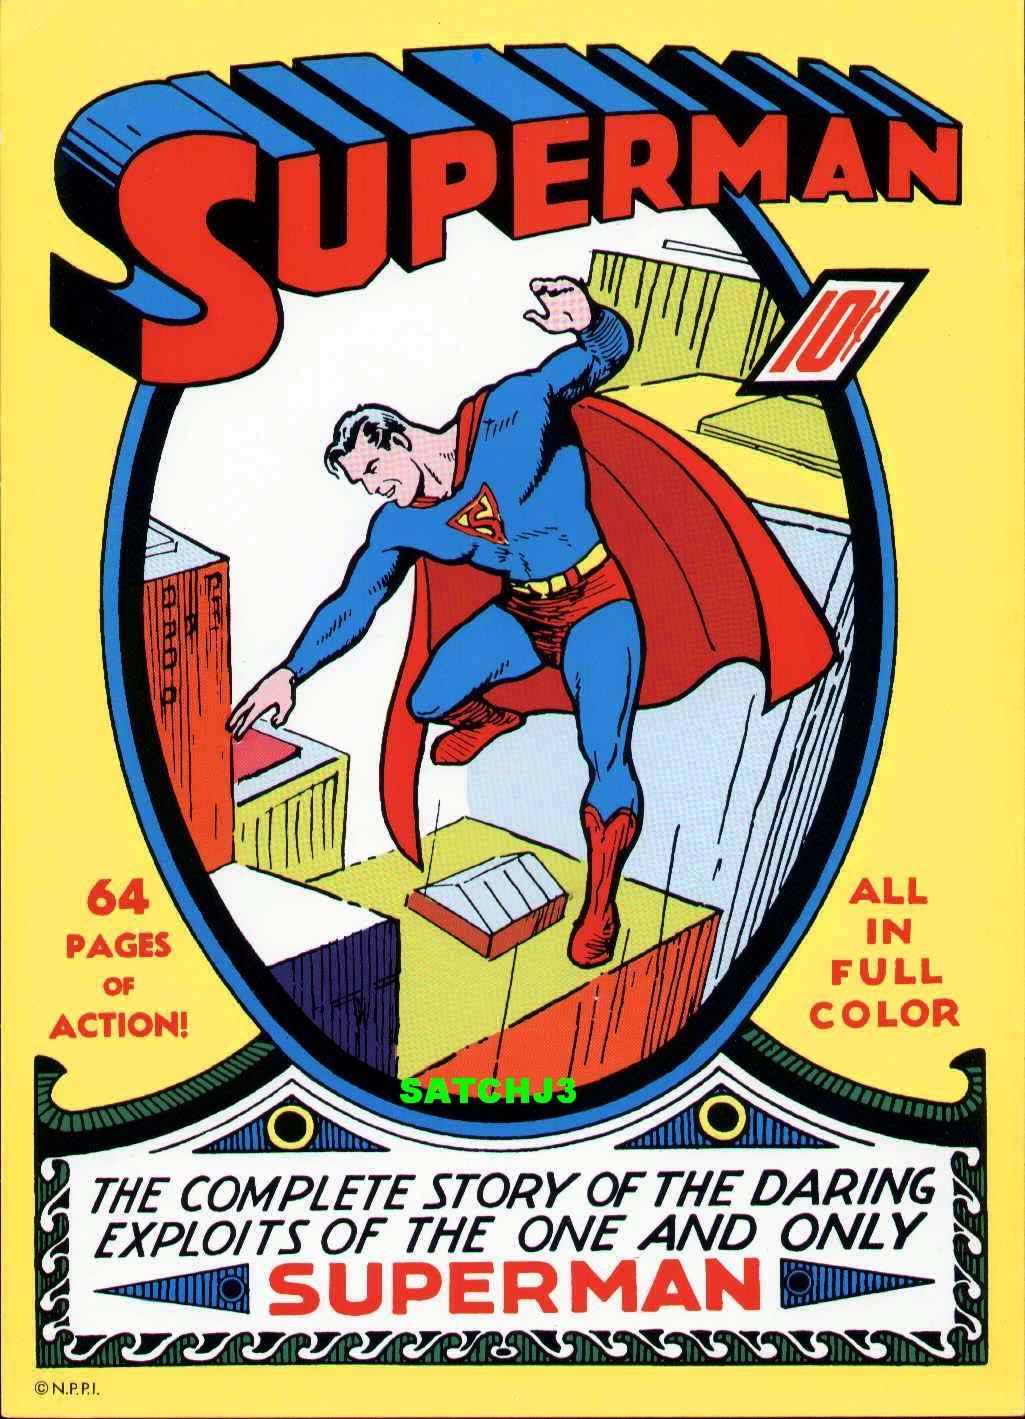 Celebrate Superman Month Historical Timeline 1930s to 1960s. The Mary Sue